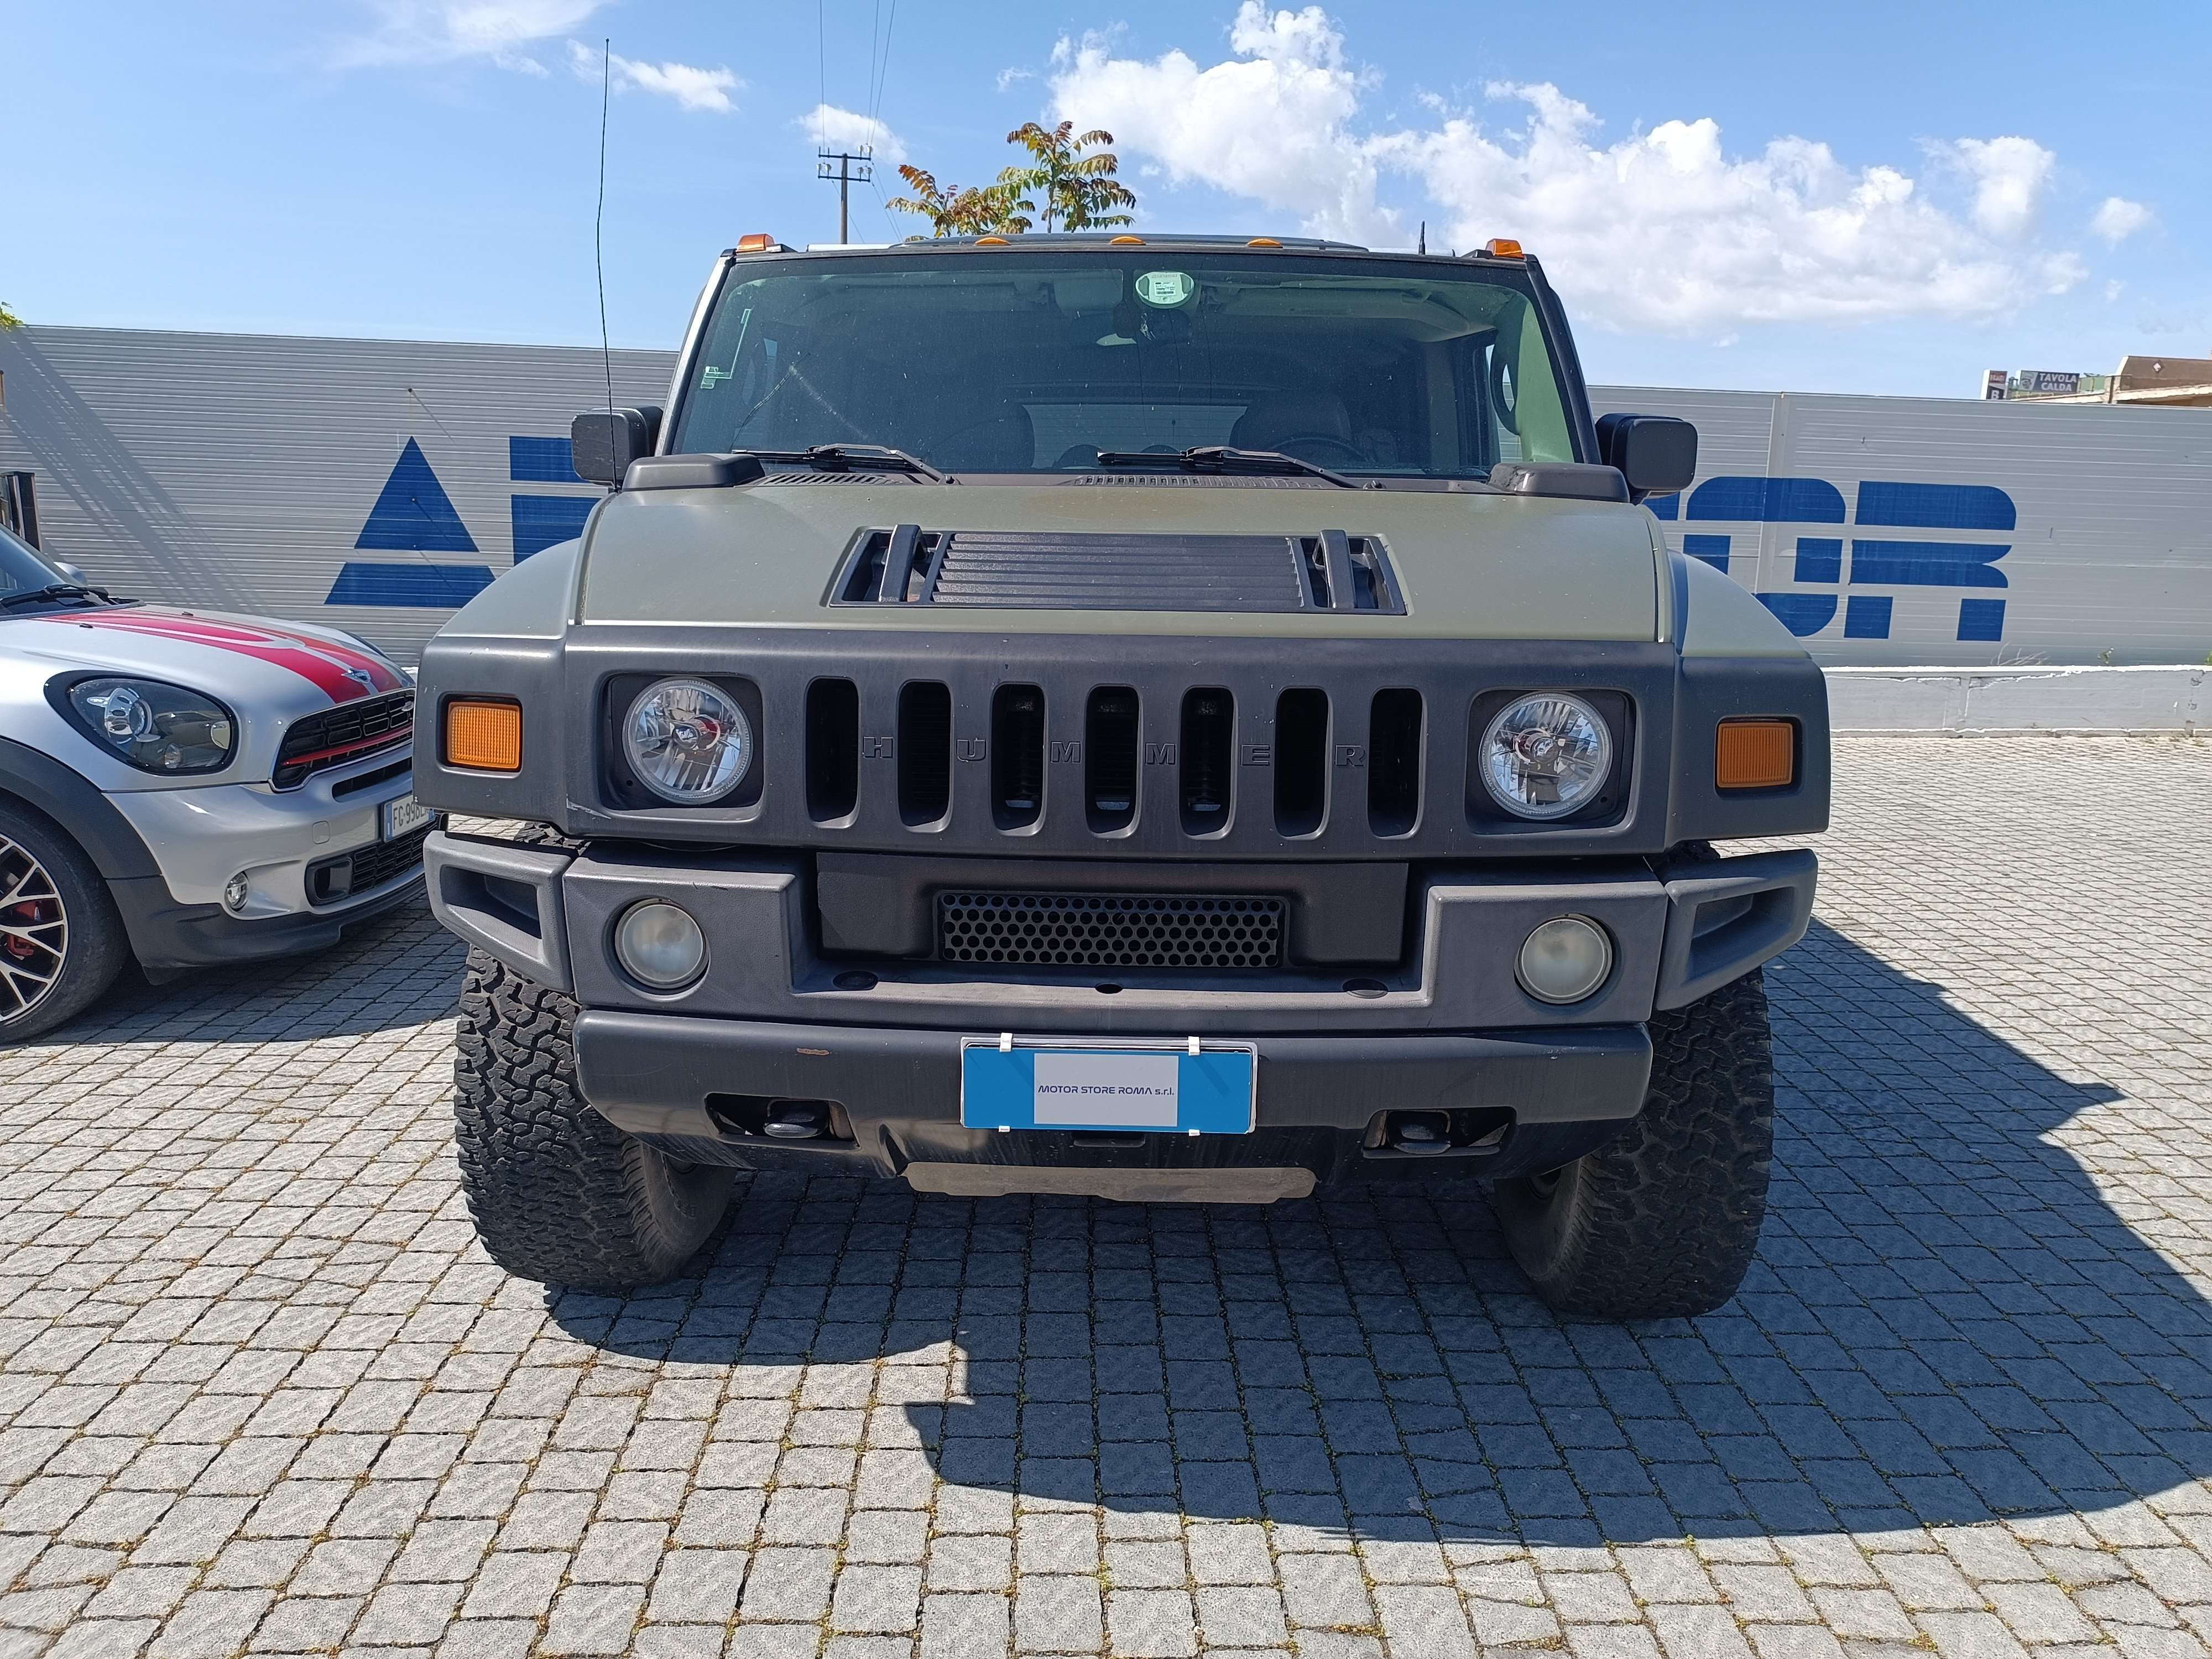 HUMMER H2 Off-Road/Pick-up in Green used in Roma - RM for € 25,500.-